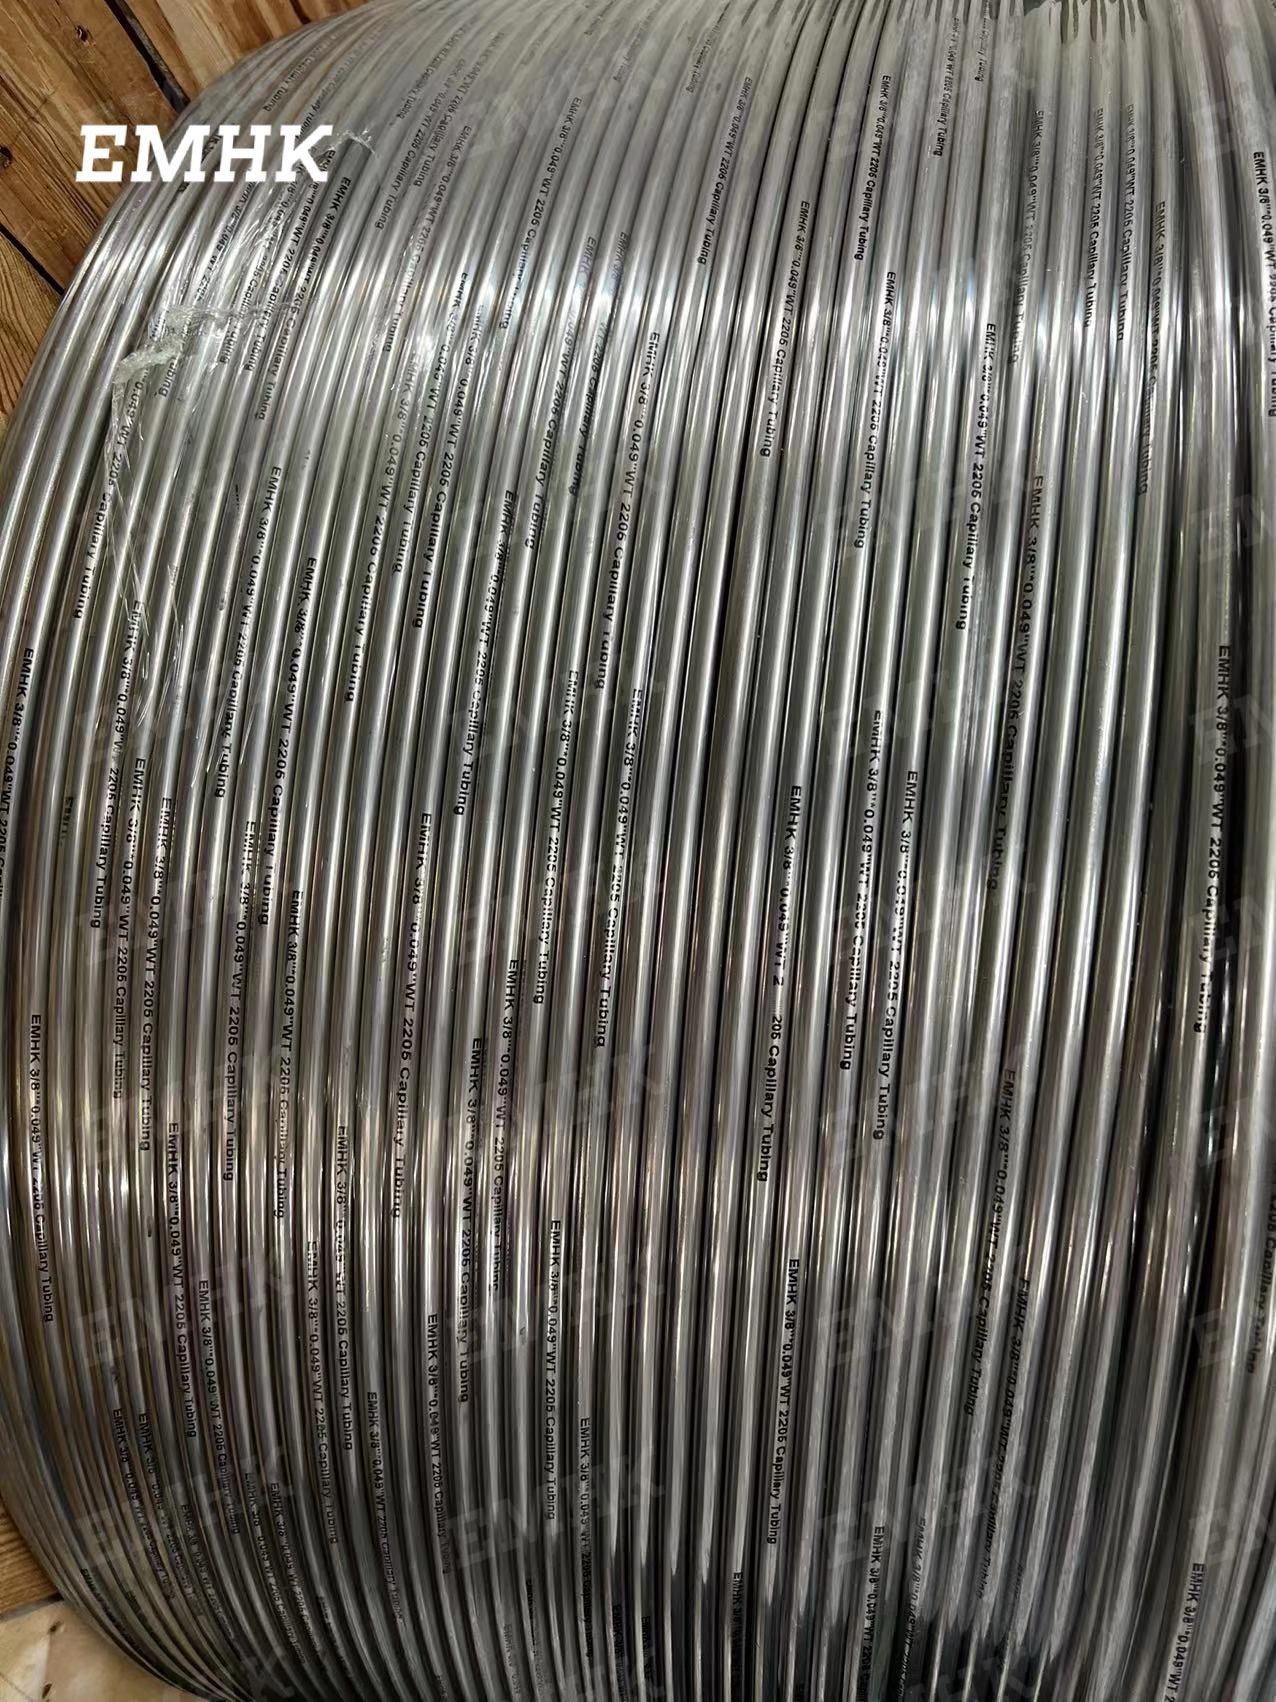 How Does The Corrosion Resistance of Stainless Steel Coiled Tubing Make It A Popular Choice for Harsh Environments?